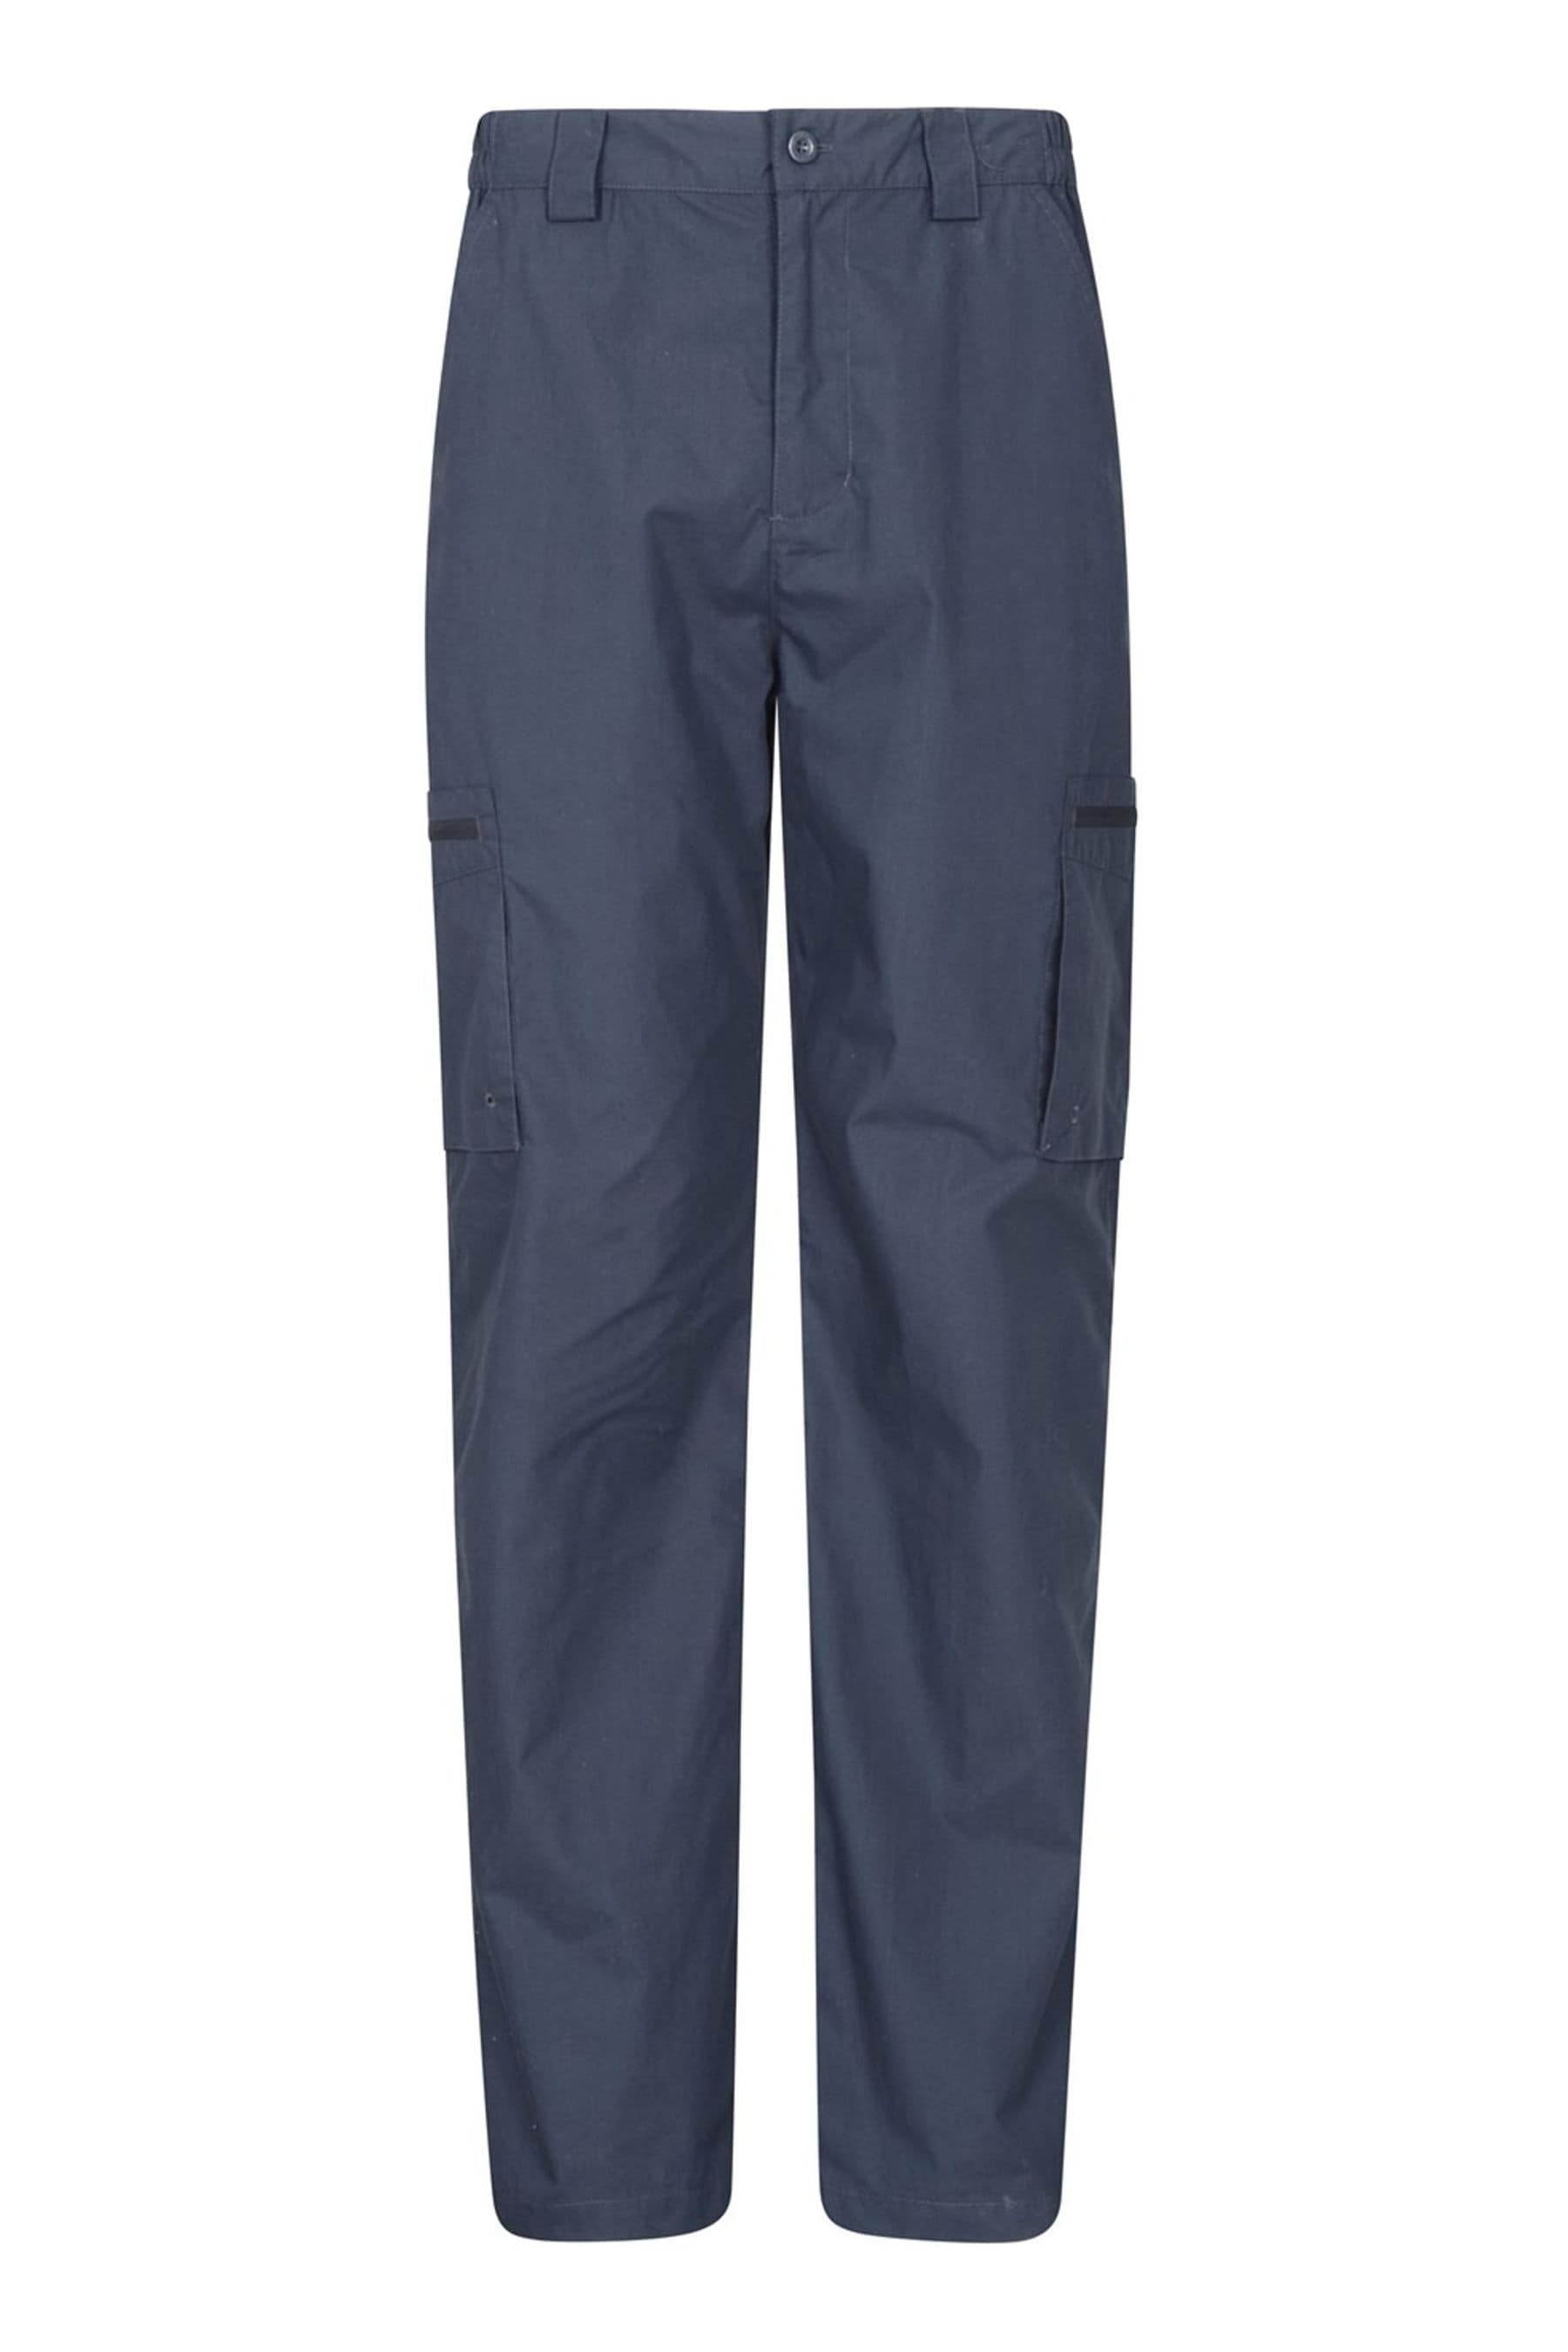 Buy Mountain Warehouse Blue Trek II Mens Trousers from the Next UK ...